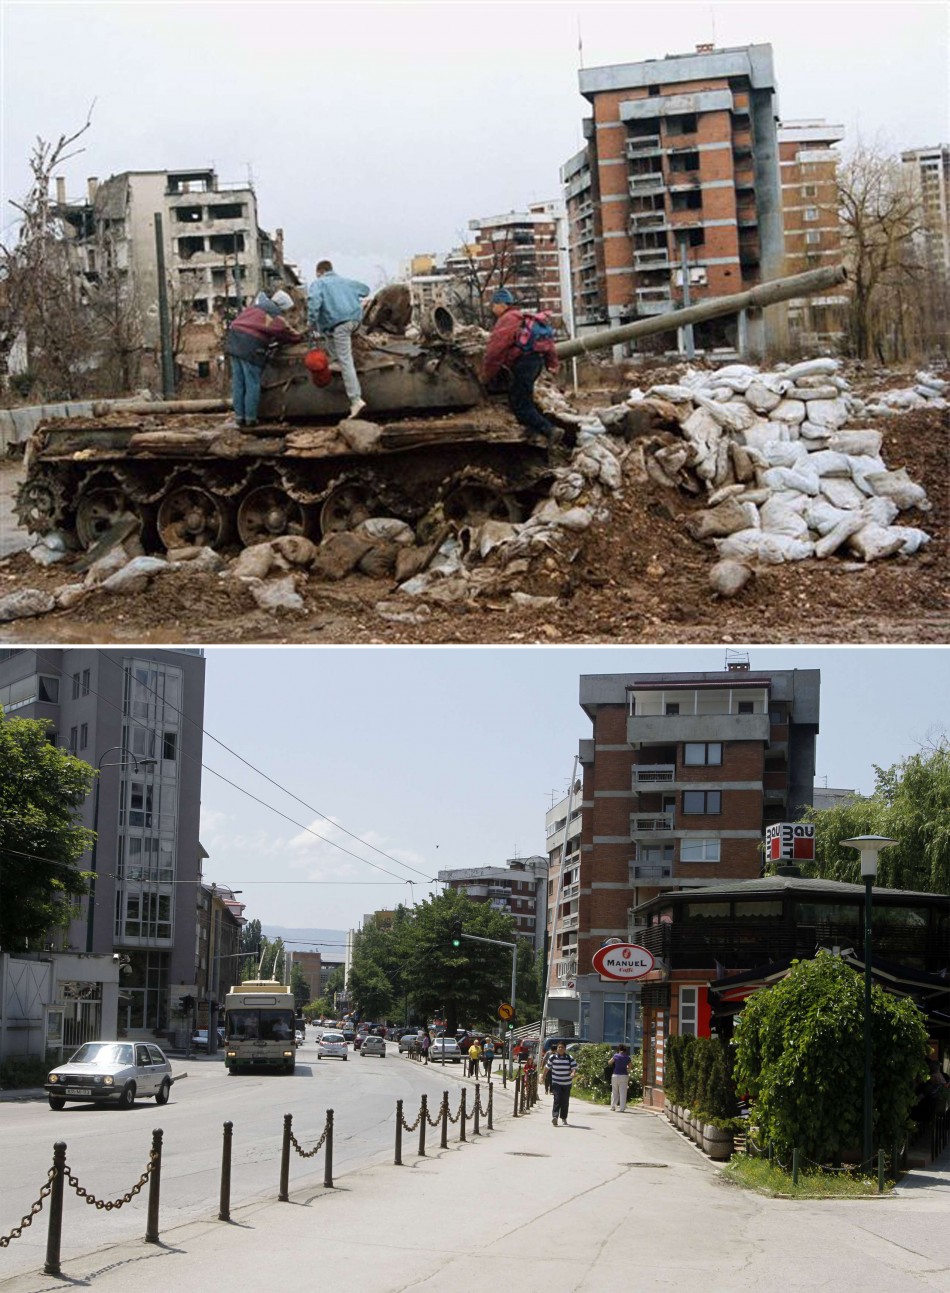 Combo photo shows disused tank standing at crossroad in front of ruined building in Kovacici district in Sarajevo people walking along same road today